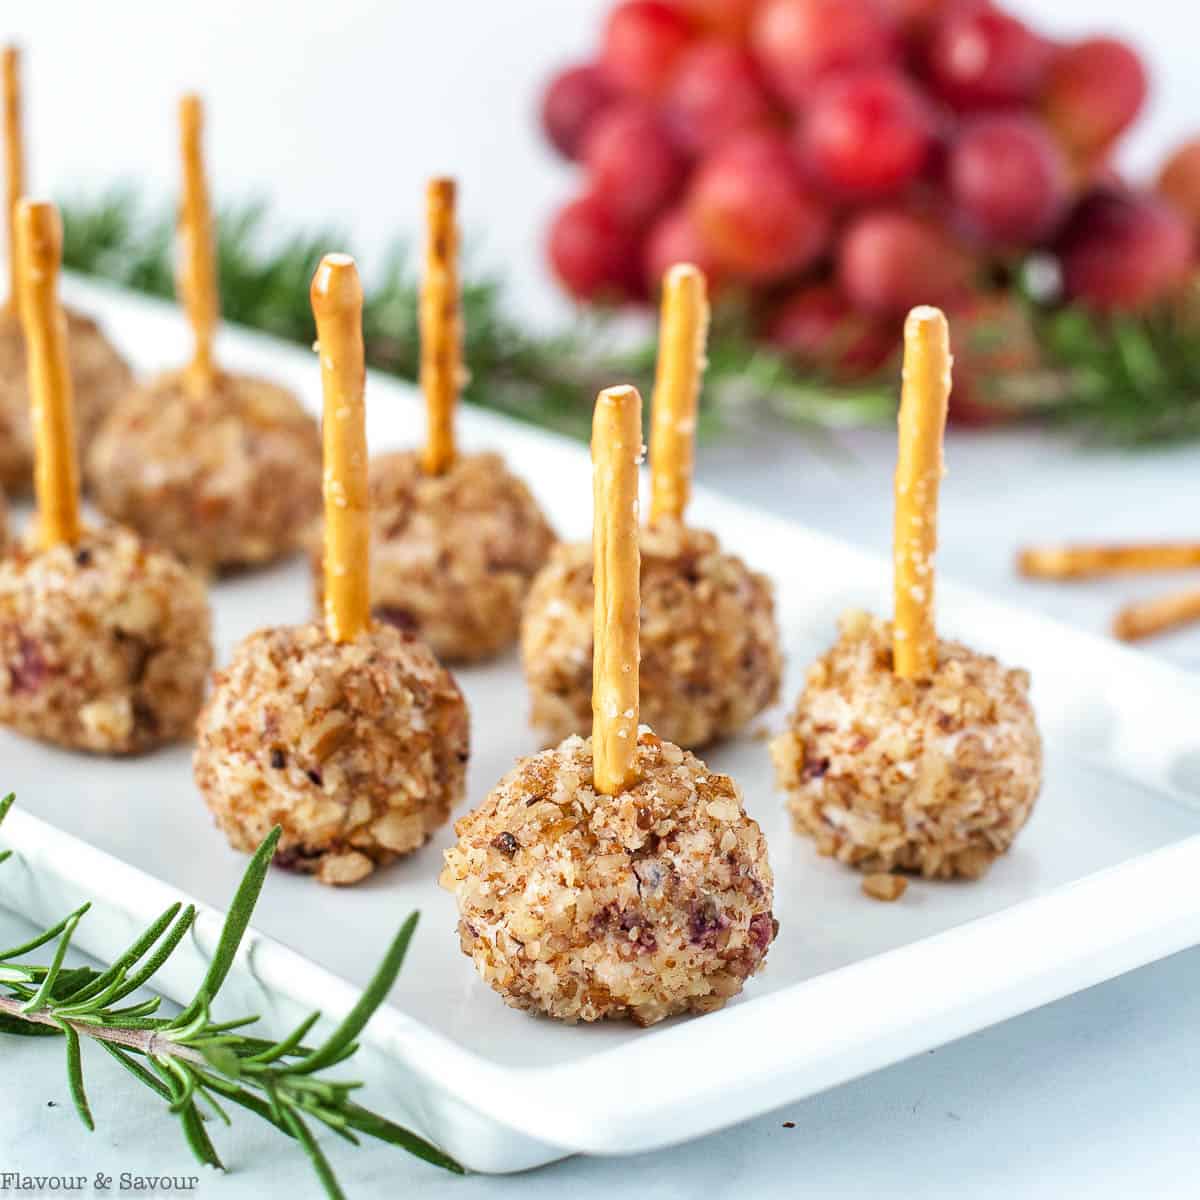 25 Last Minute Party Snacks and Appetizers